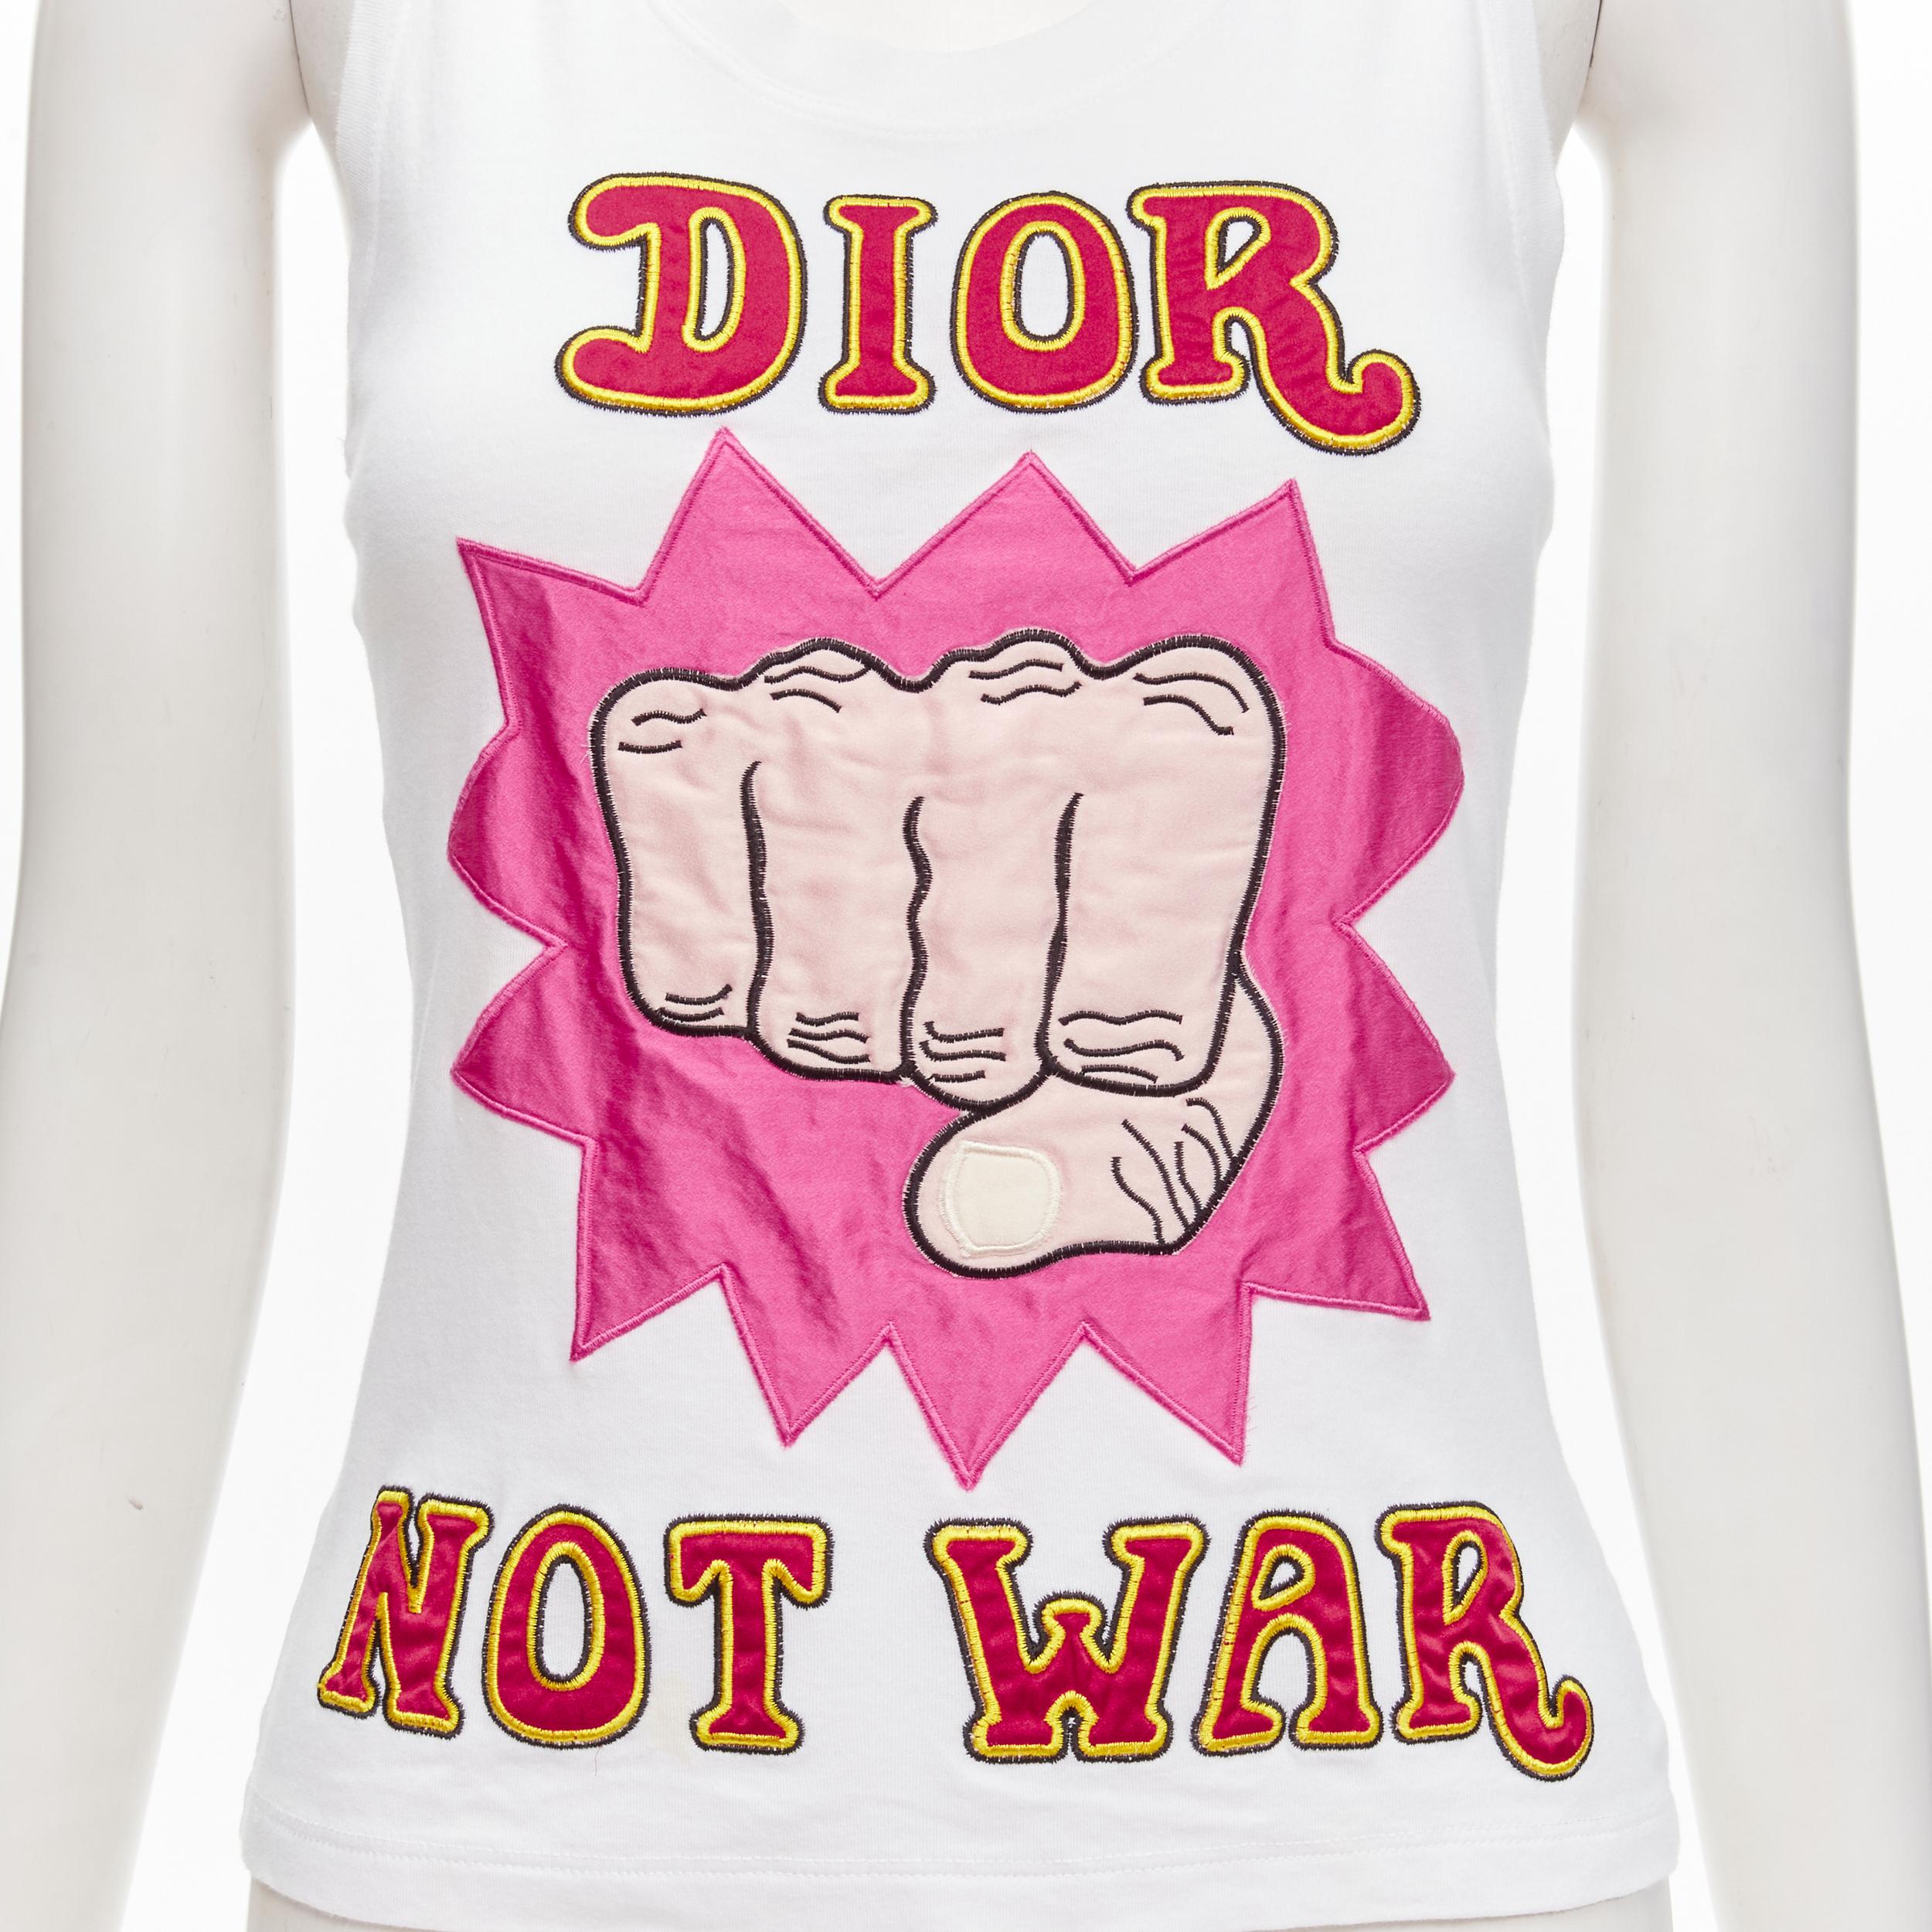 CHRISTIAN DIOR Galliano 2005 Vintage Not War Propaganda print white tank top FR38 M
Reference: TGAS/C01954
Brand: Christian Dior
Designer: John Galliano
Collection: SS2005
Material: Cotton
Color: White, Pink
Pattern: Abstract
Closure: Pullover
Extra